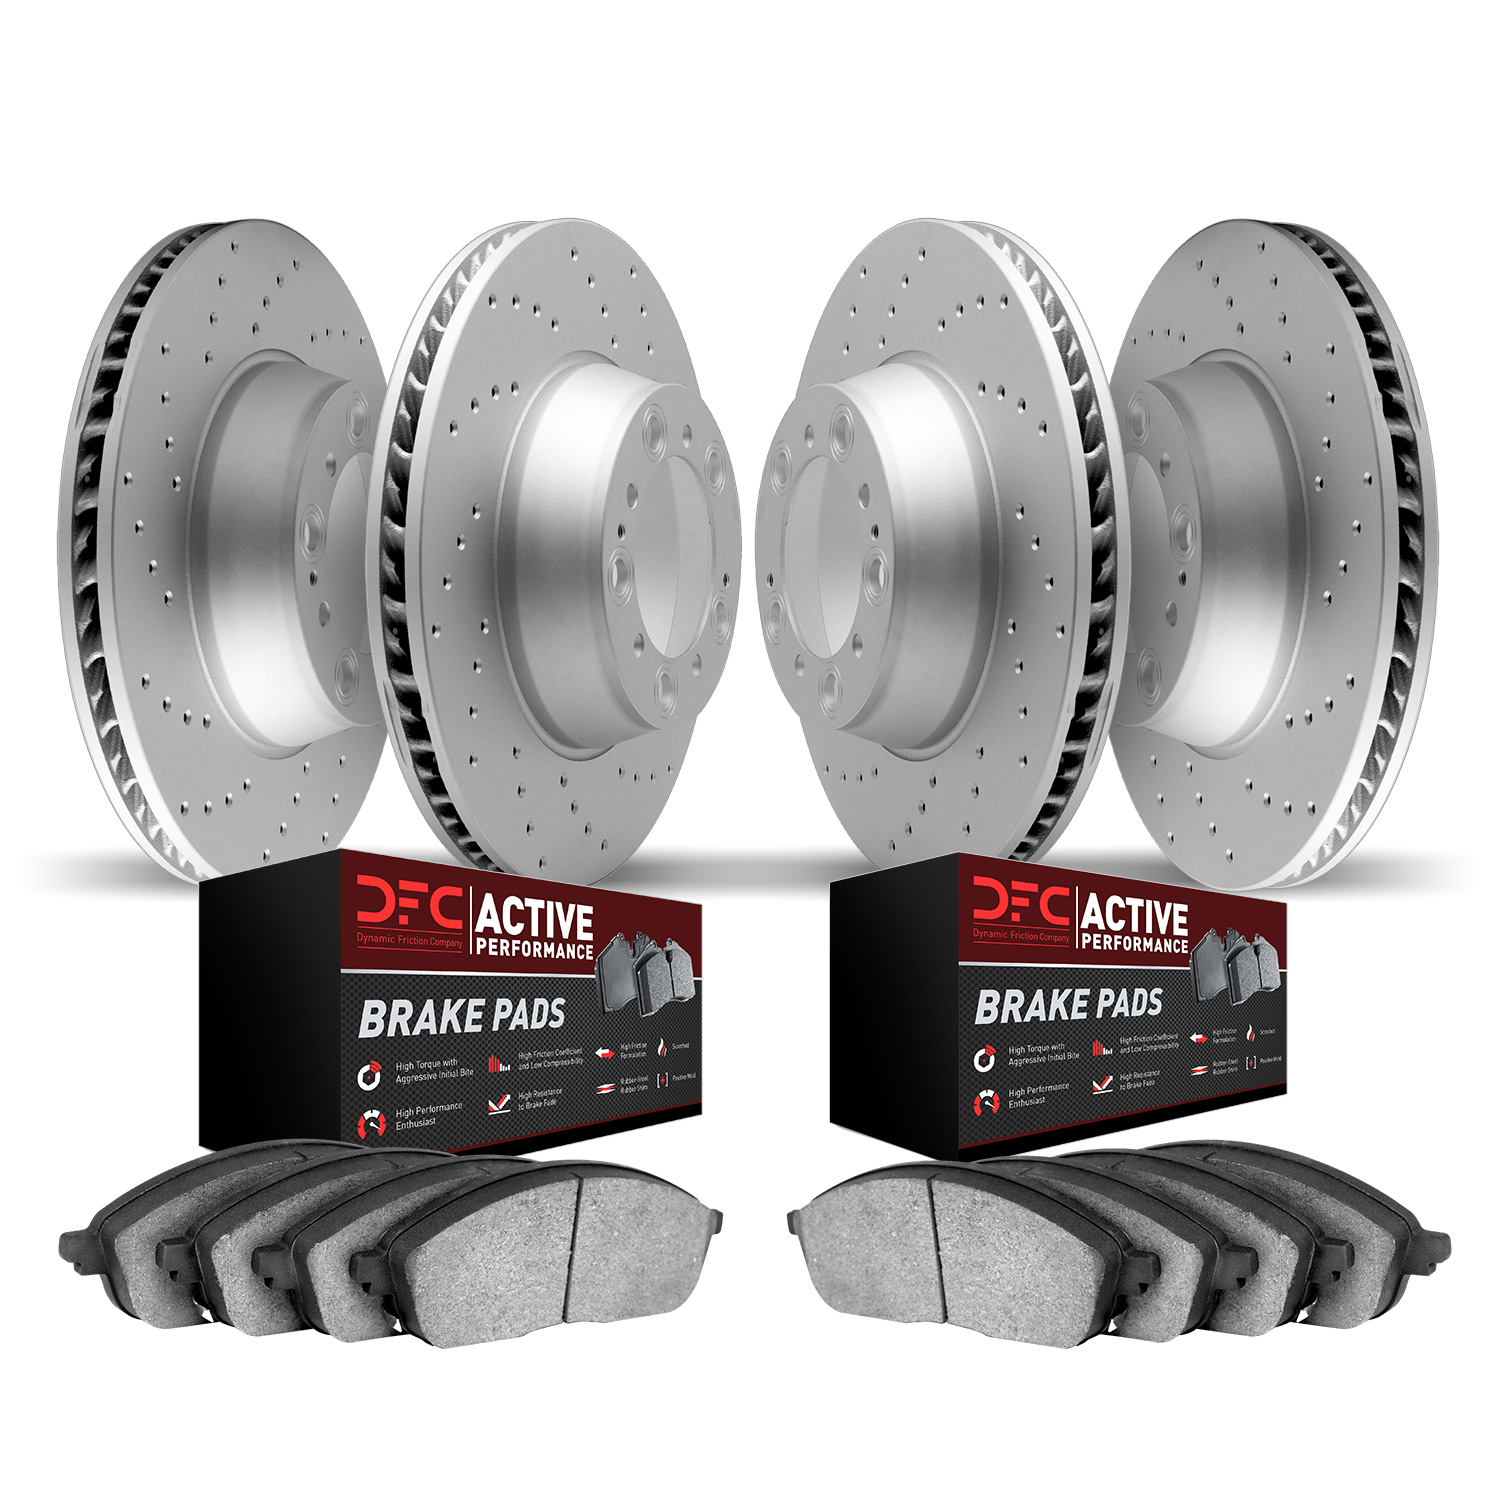 2704-80018 Geoperformance Drilled Brake Rotors with Active Performance Pads Kit, 2004-2011 Ford/Lincoln/Mercury/Mazda, Position: